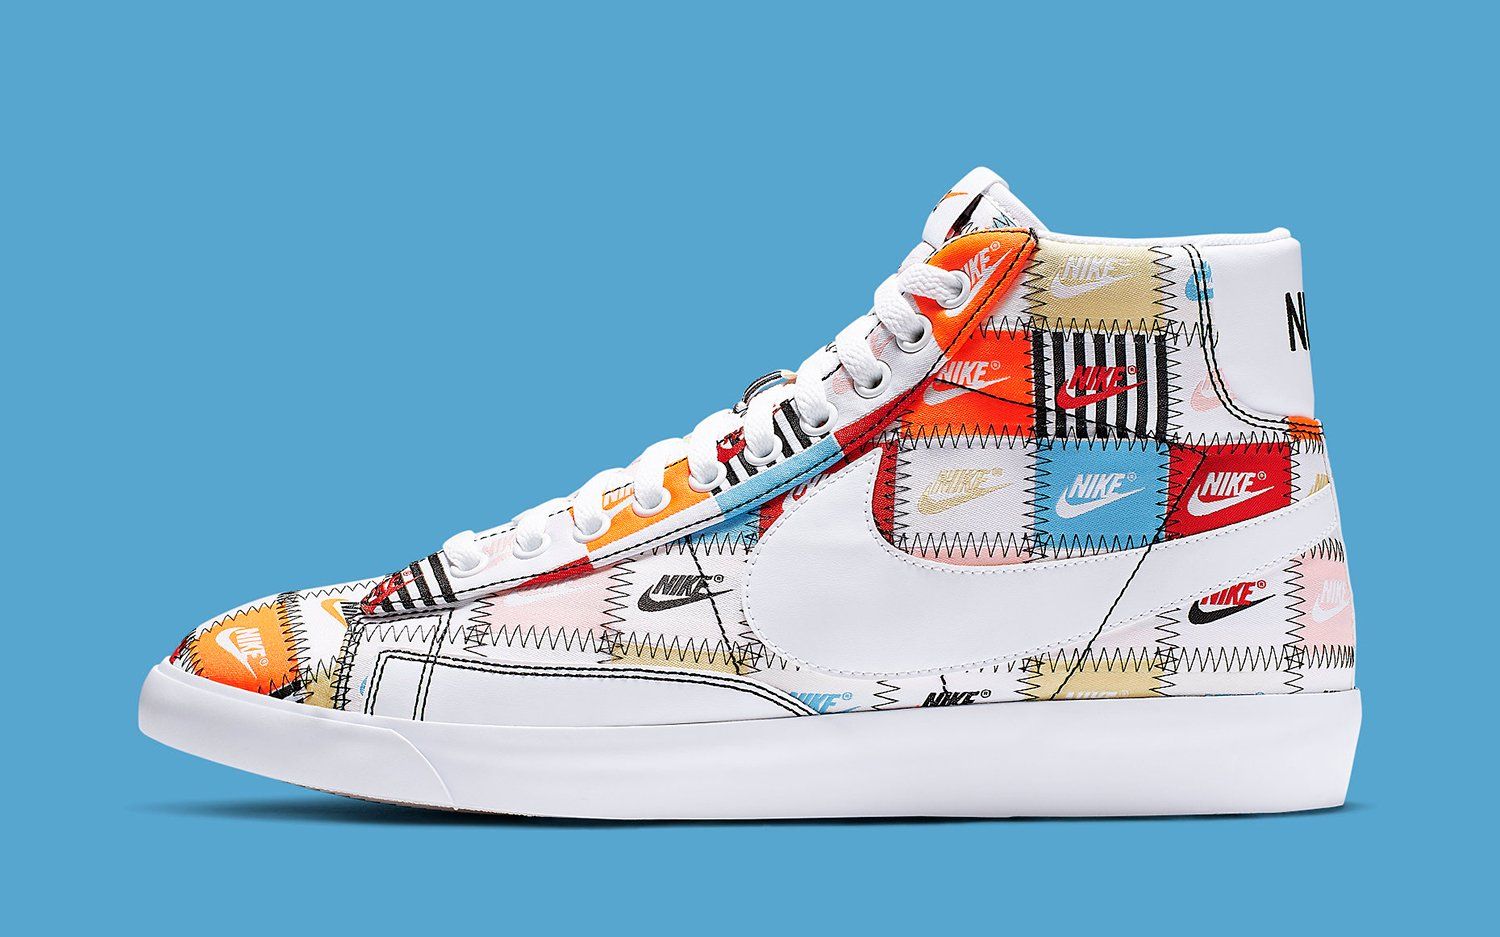 The Nike Blazer Pops Up with Patchwork 